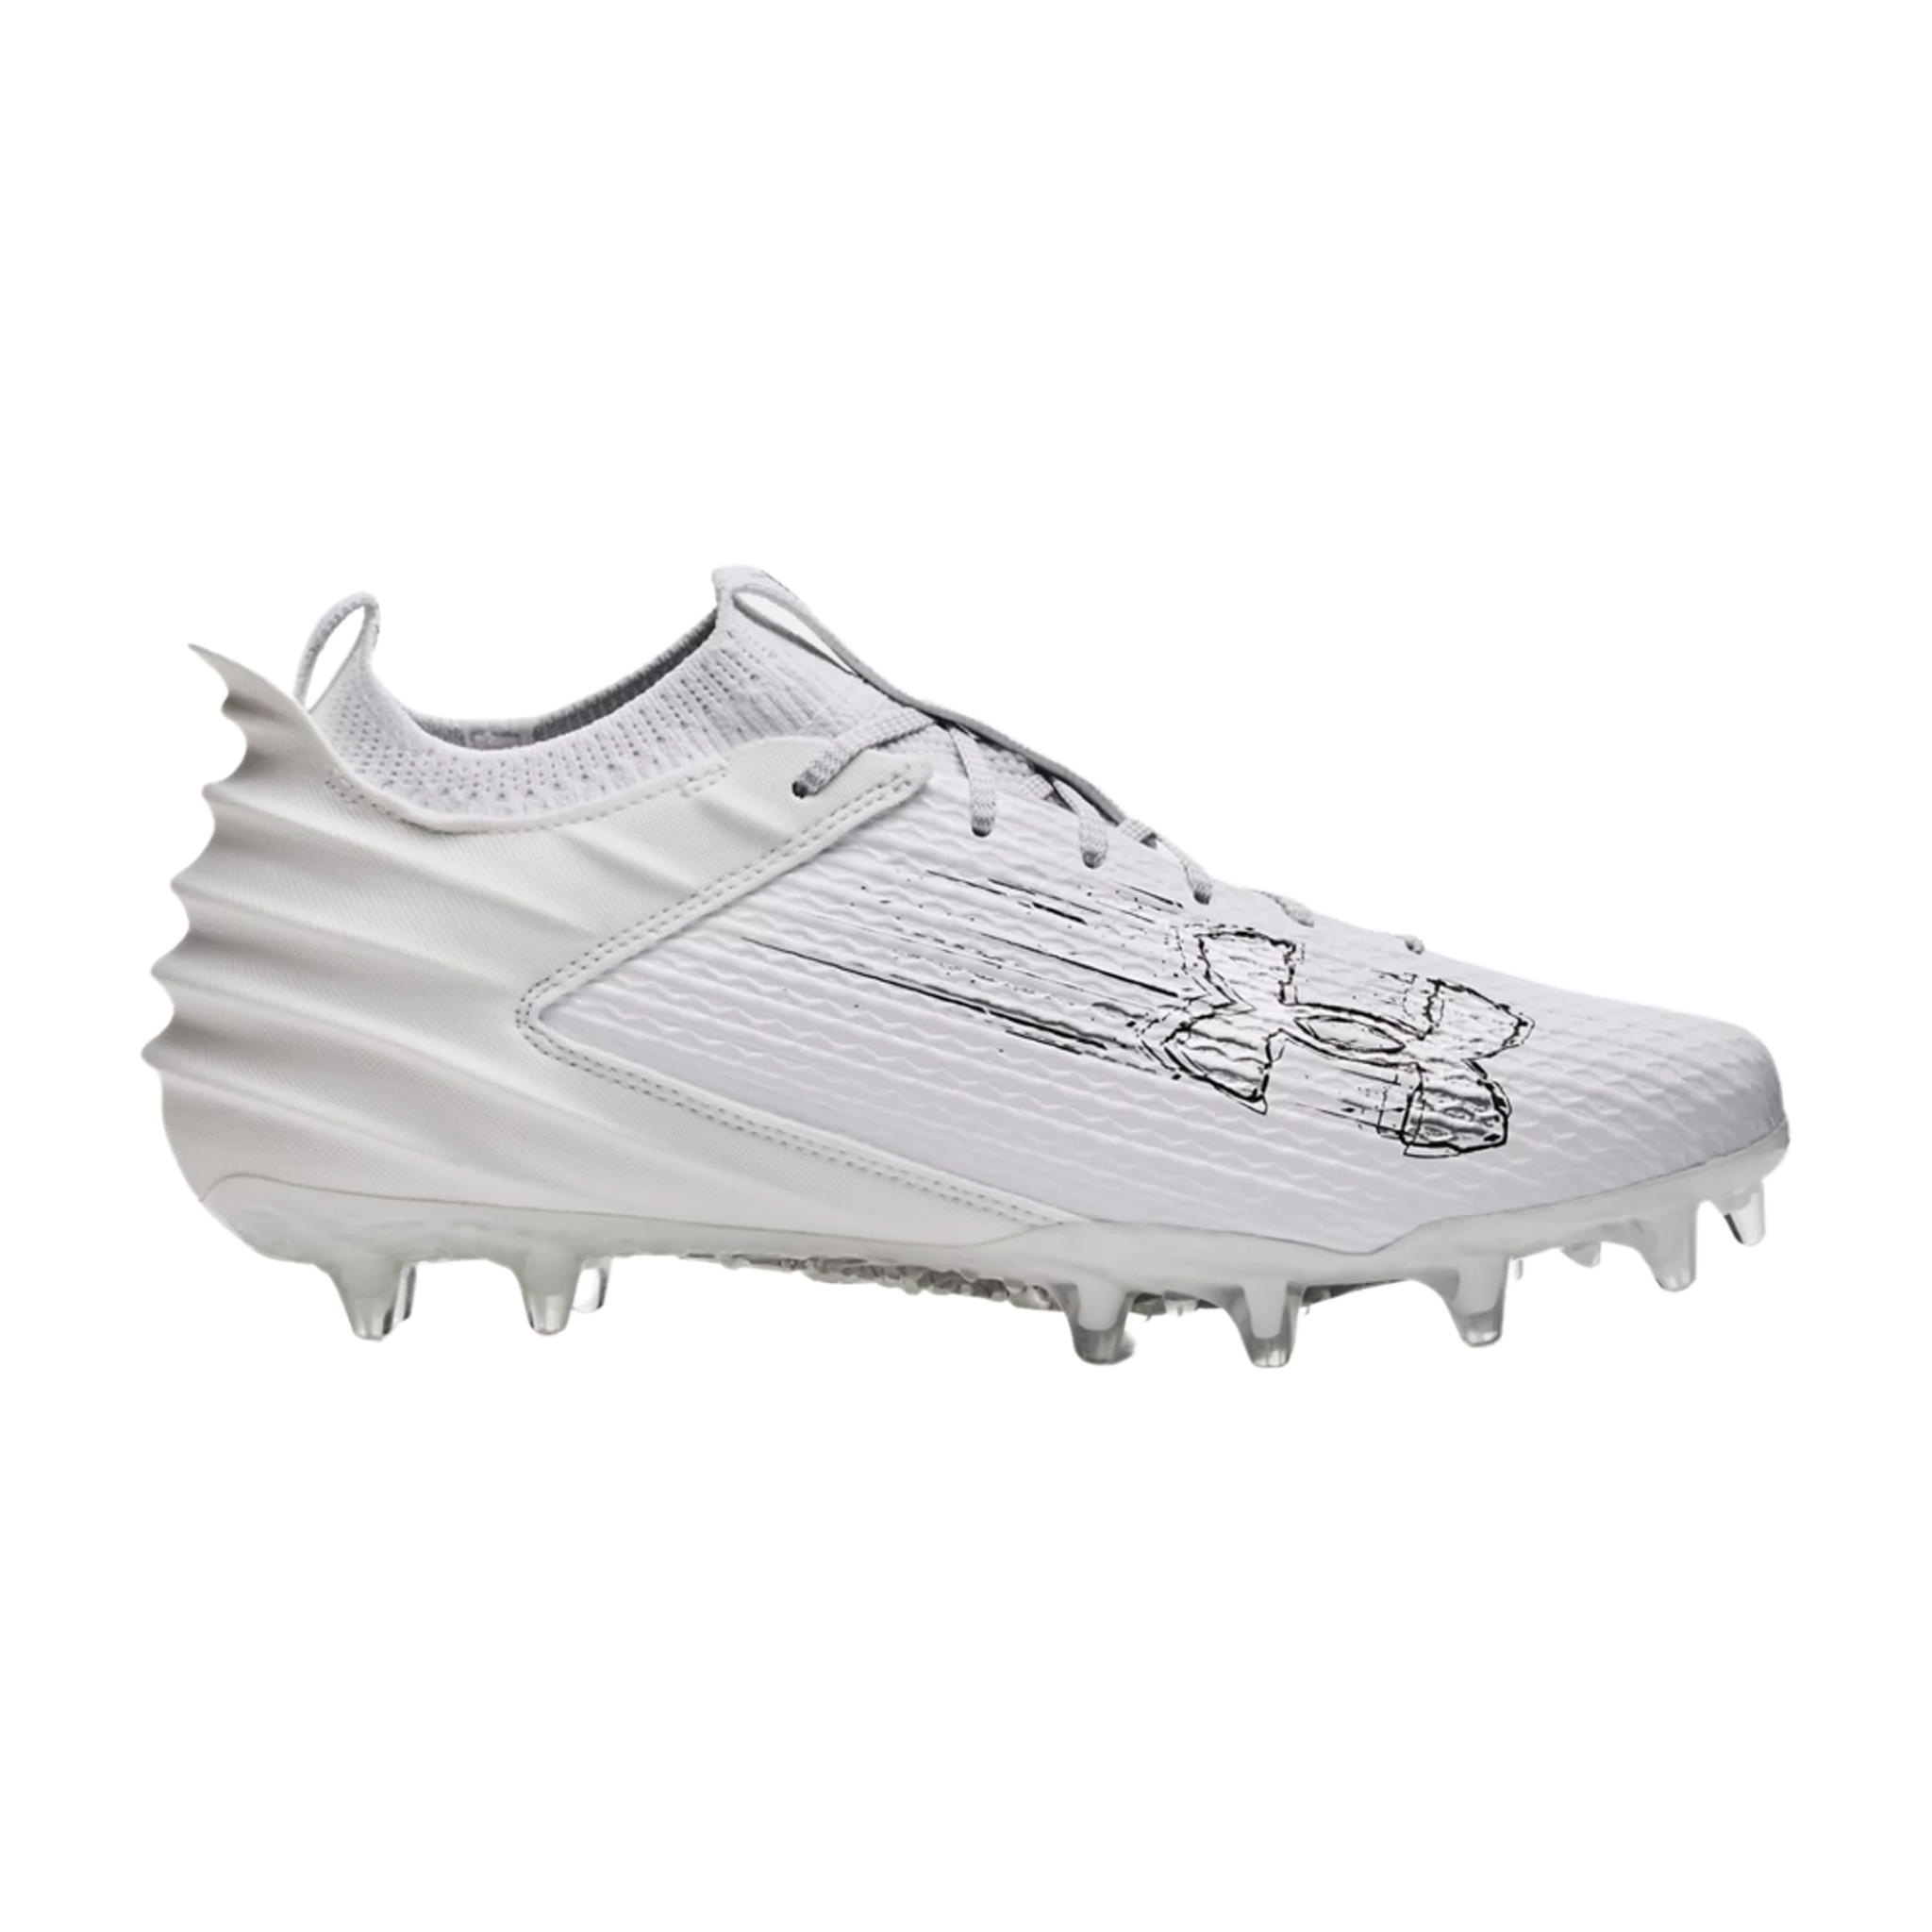 Under Armor Men's Blur Smoke 2.0 MC Football Cleats - White- football cleats for receiver, DB, running back